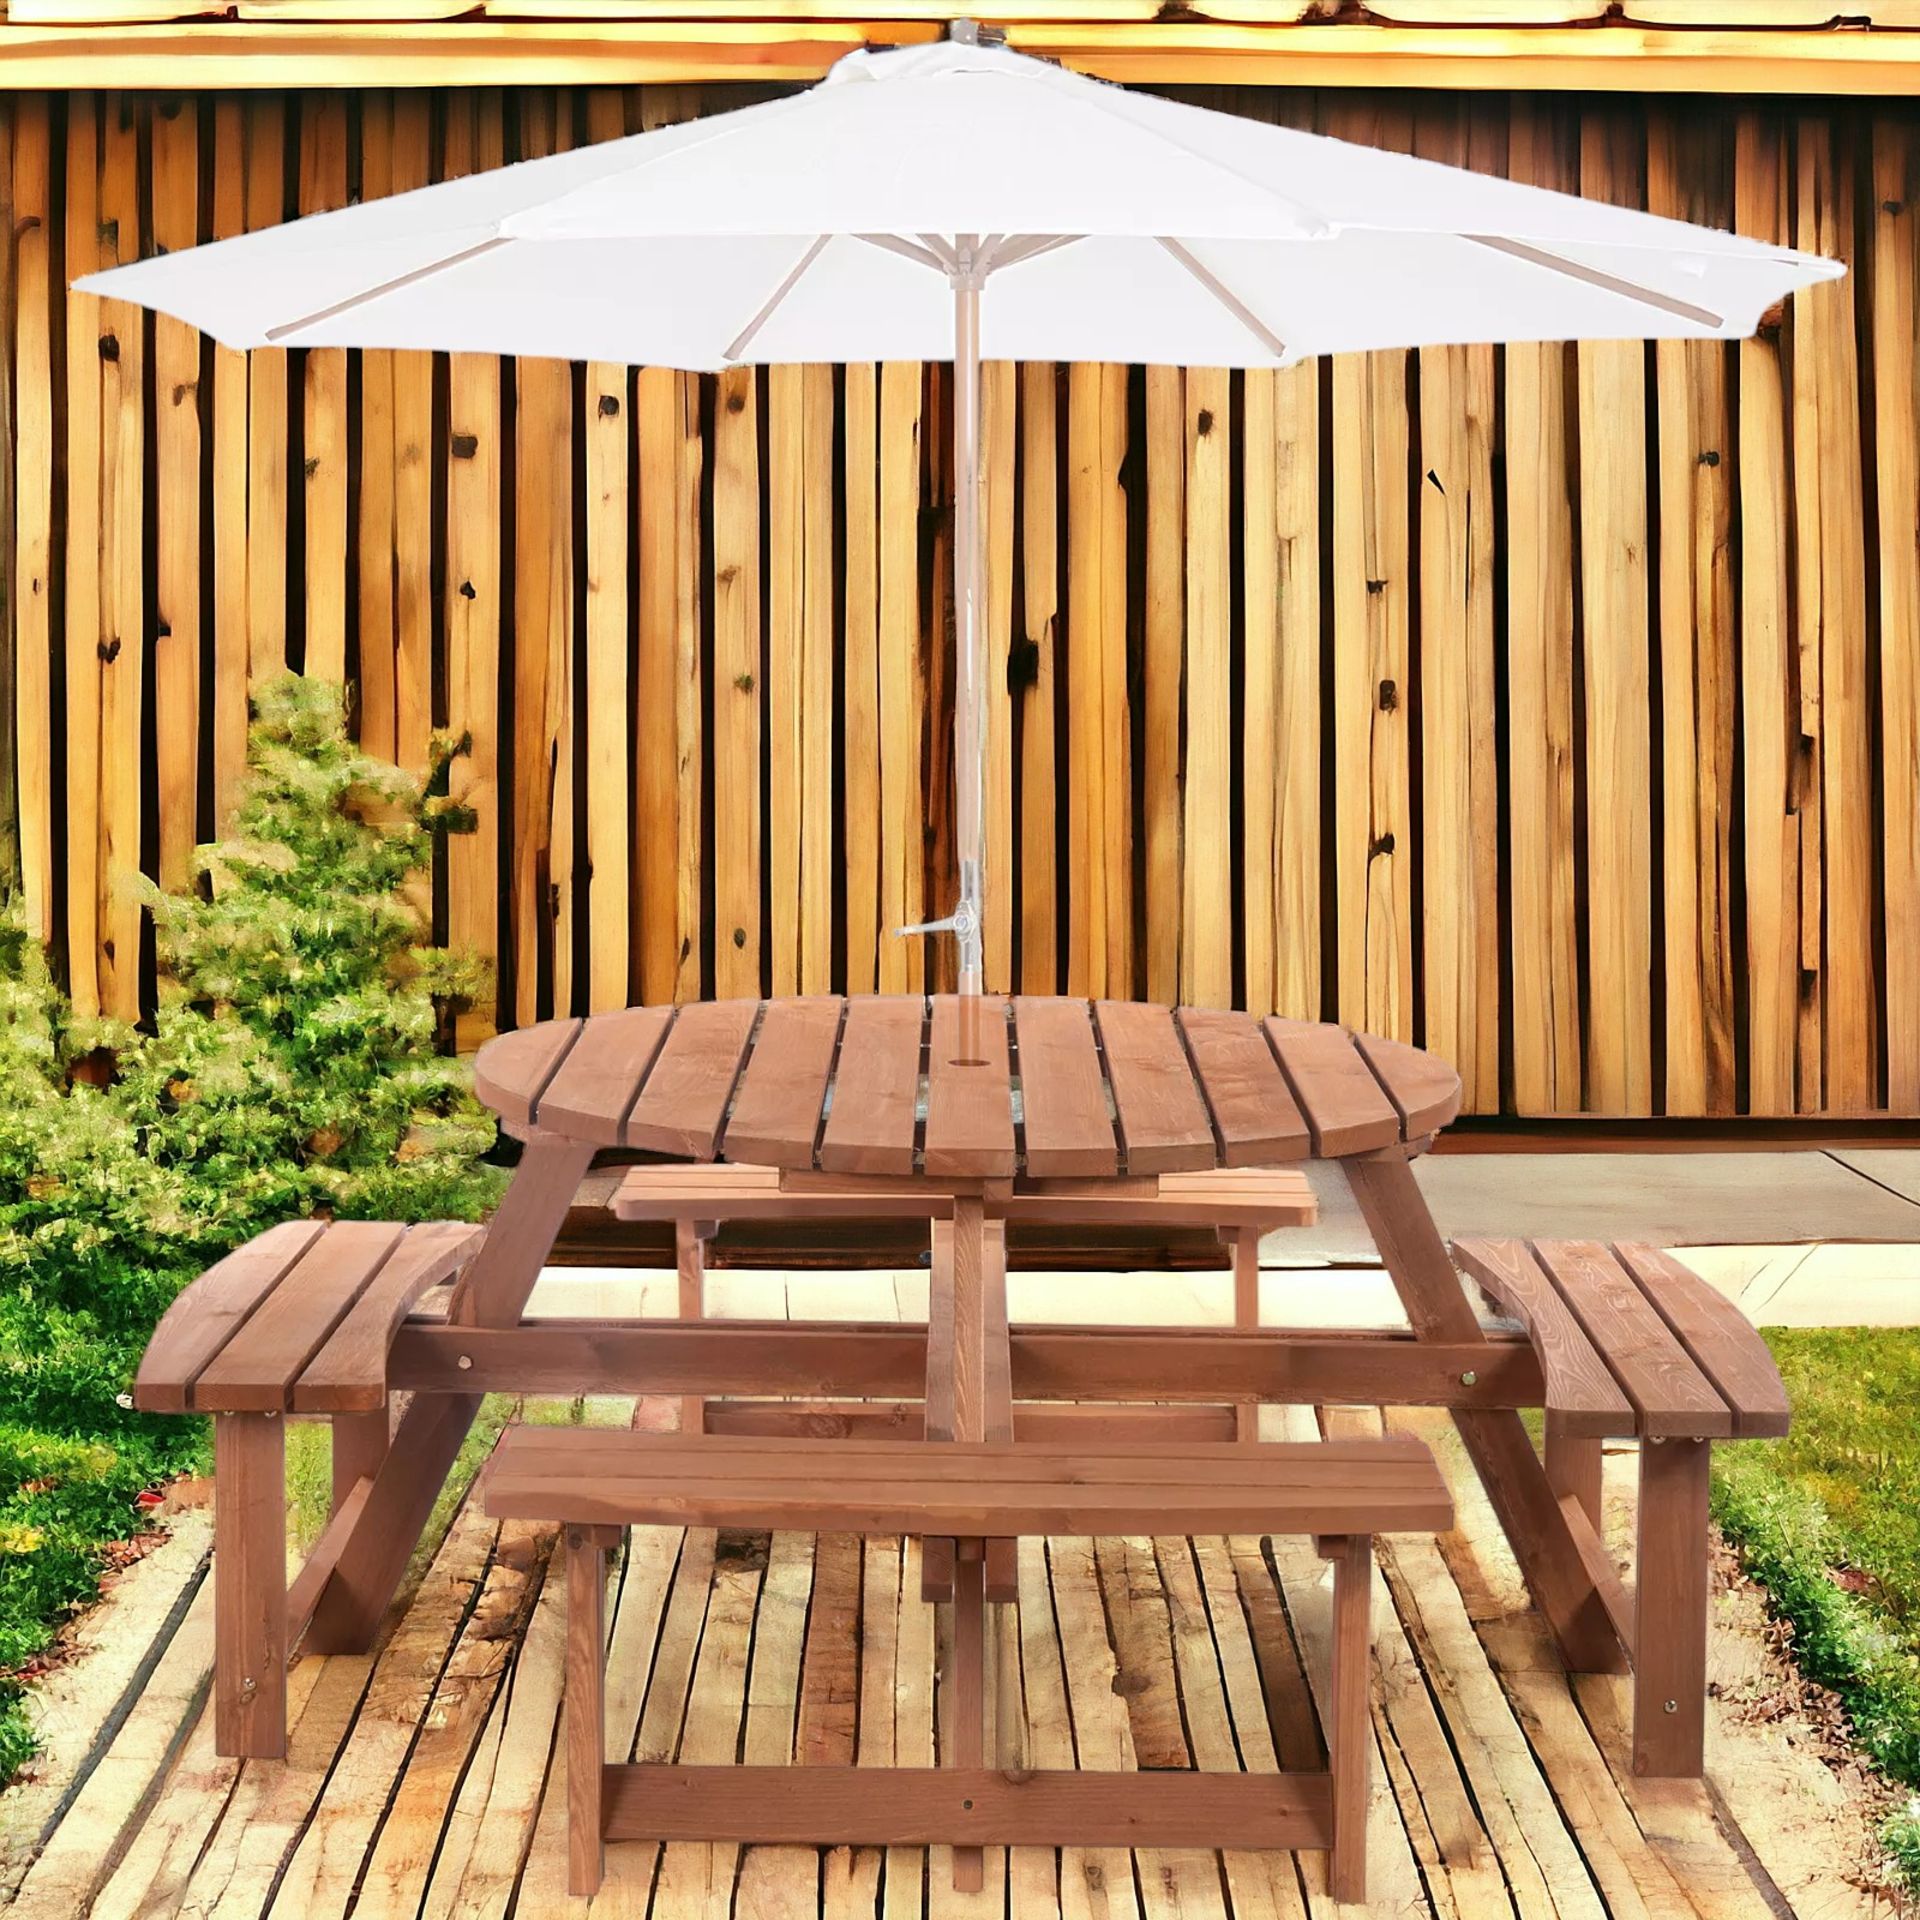 FREE DELIVERY- BRAND NEW 8 SEAT GARDEN OUTDOOR WOODEN ROUND PICNIC TABLE BENCH - Image 2 of 2